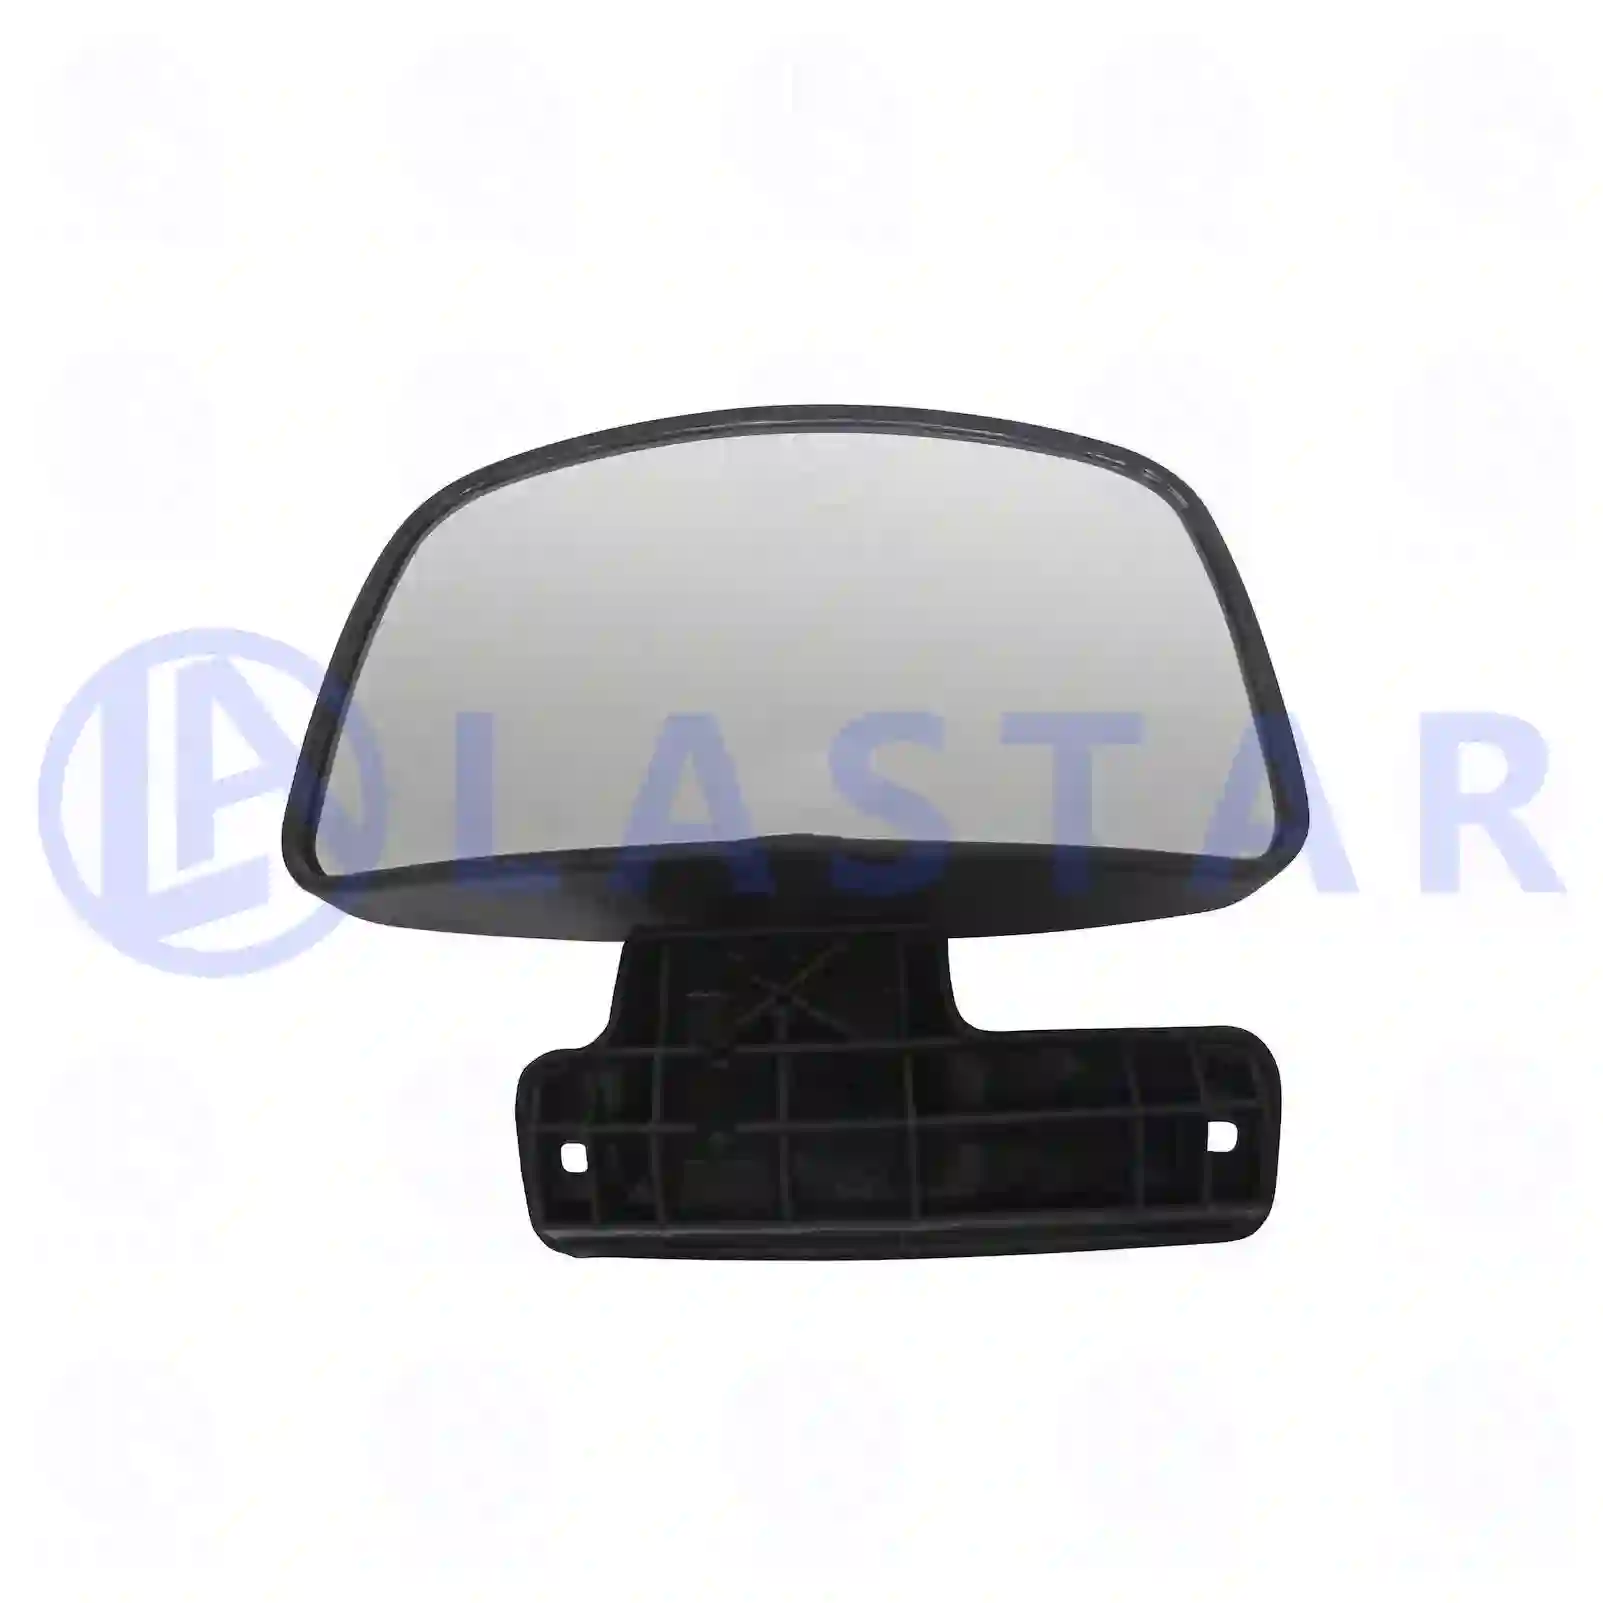 Kerb observation mirror, right, 77719988, 1409962, 1709390, 5010578511, ZG60909-0008 ||  77719988 Lastar Spare Part | Truck Spare Parts, Auotomotive Spare Parts Kerb observation mirror, right, 77719988, 1409962, 1709390, 5010578511, ZG60909-0008 ||  77719988 Lastar Spare Part | Truck Spare Parts, Auotomotive Spare Parts